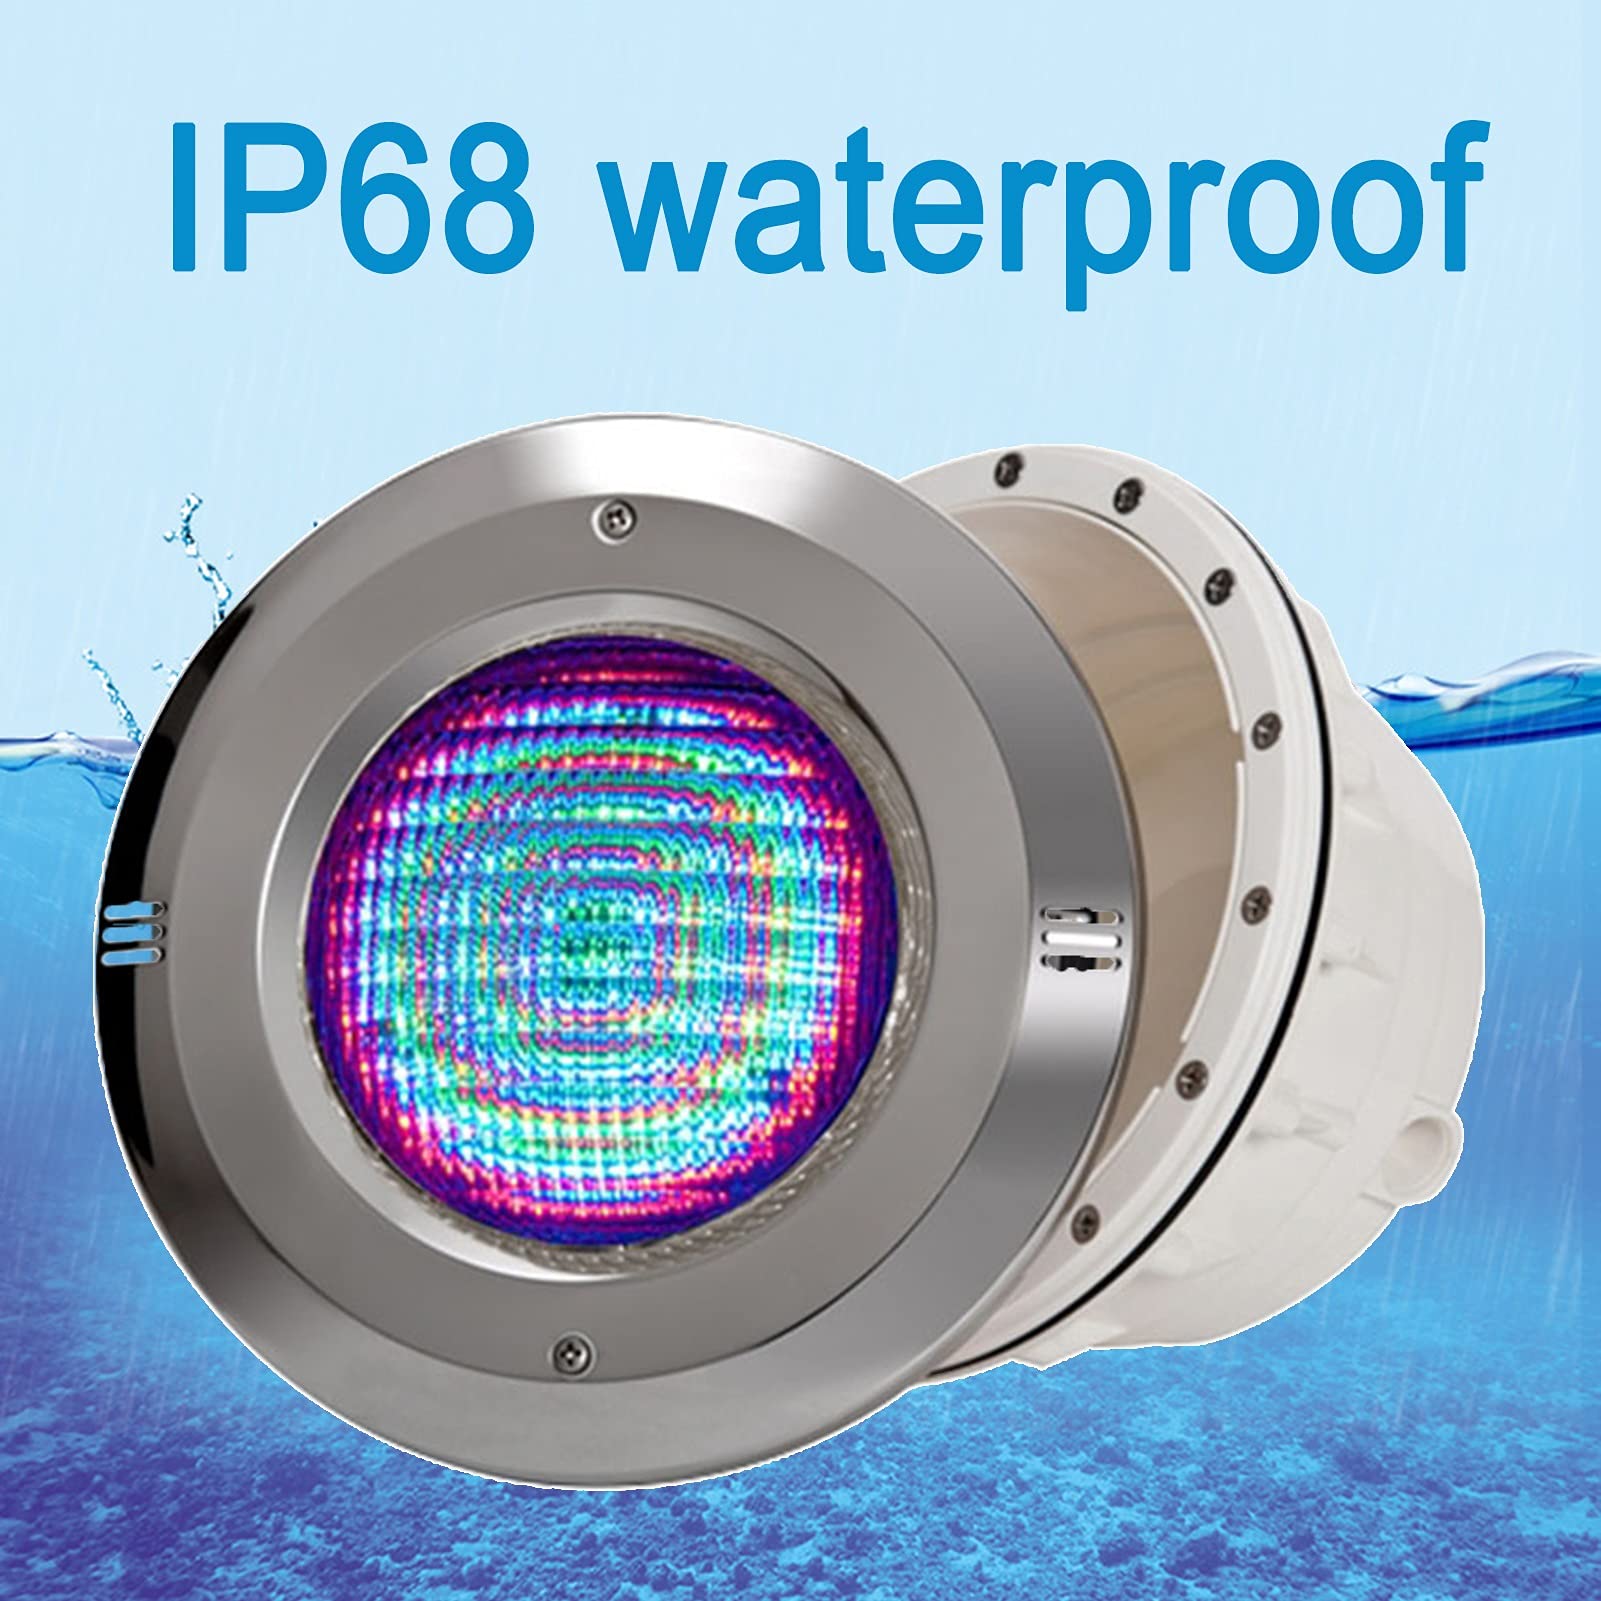 LED Pool Lamp, Par56 Recessed Underwater Lighting, Stainless Steel Surface 12V Waterproof IP68 for Above and Below Ground Swimming Pool (Color : RGB+Remote Control, Size : 54W)